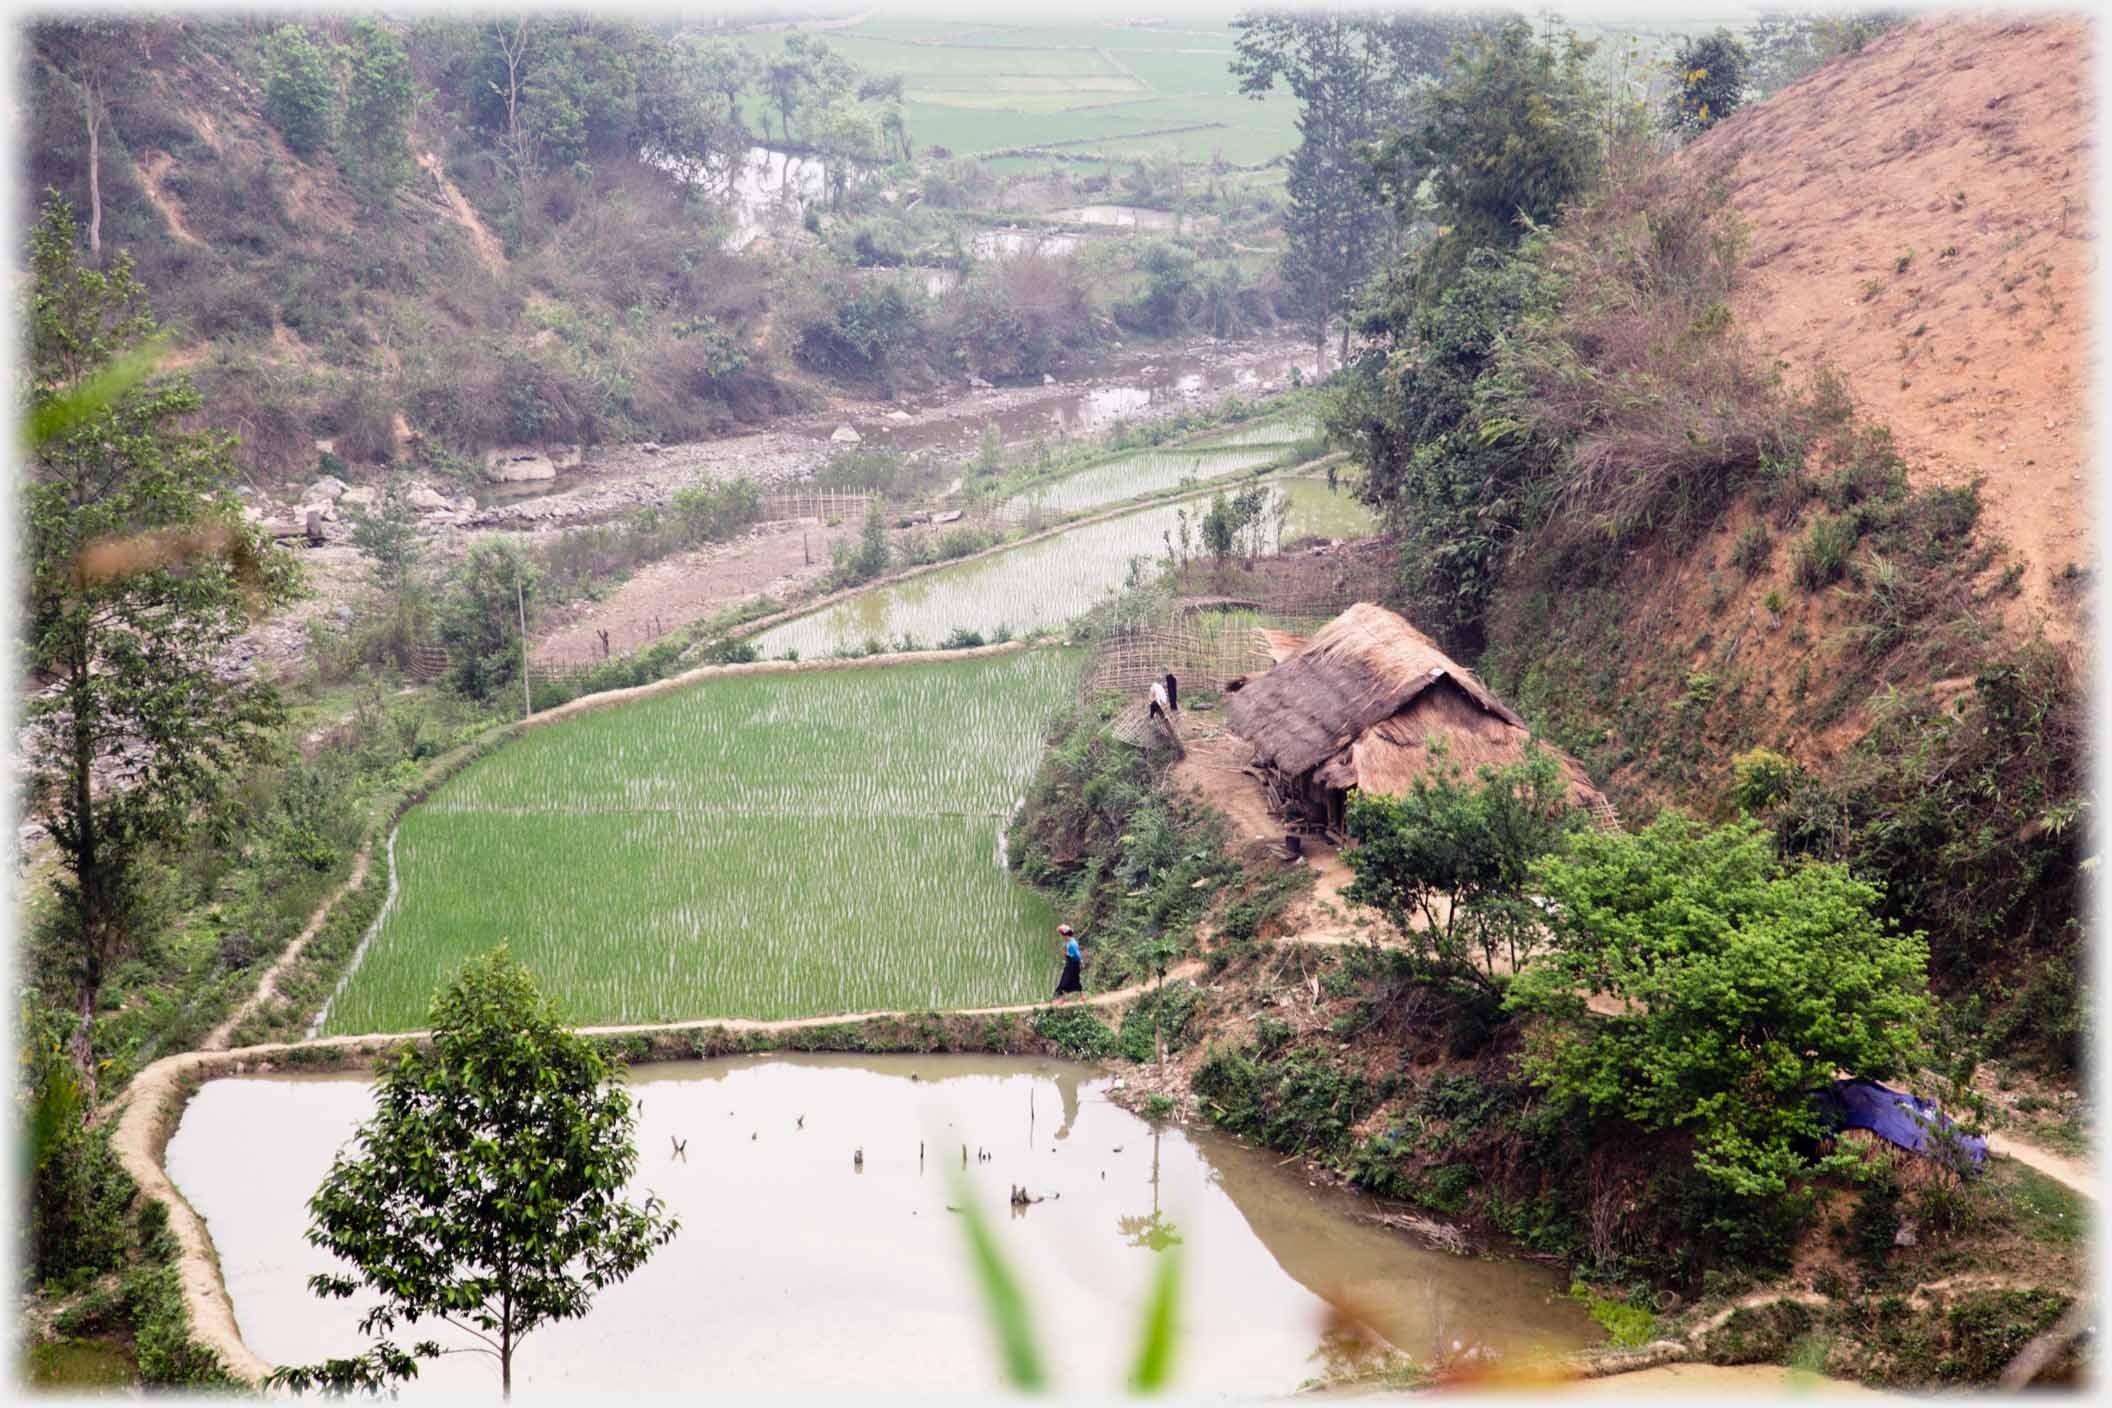 Fields in a river valley with just distinguishable person walking.